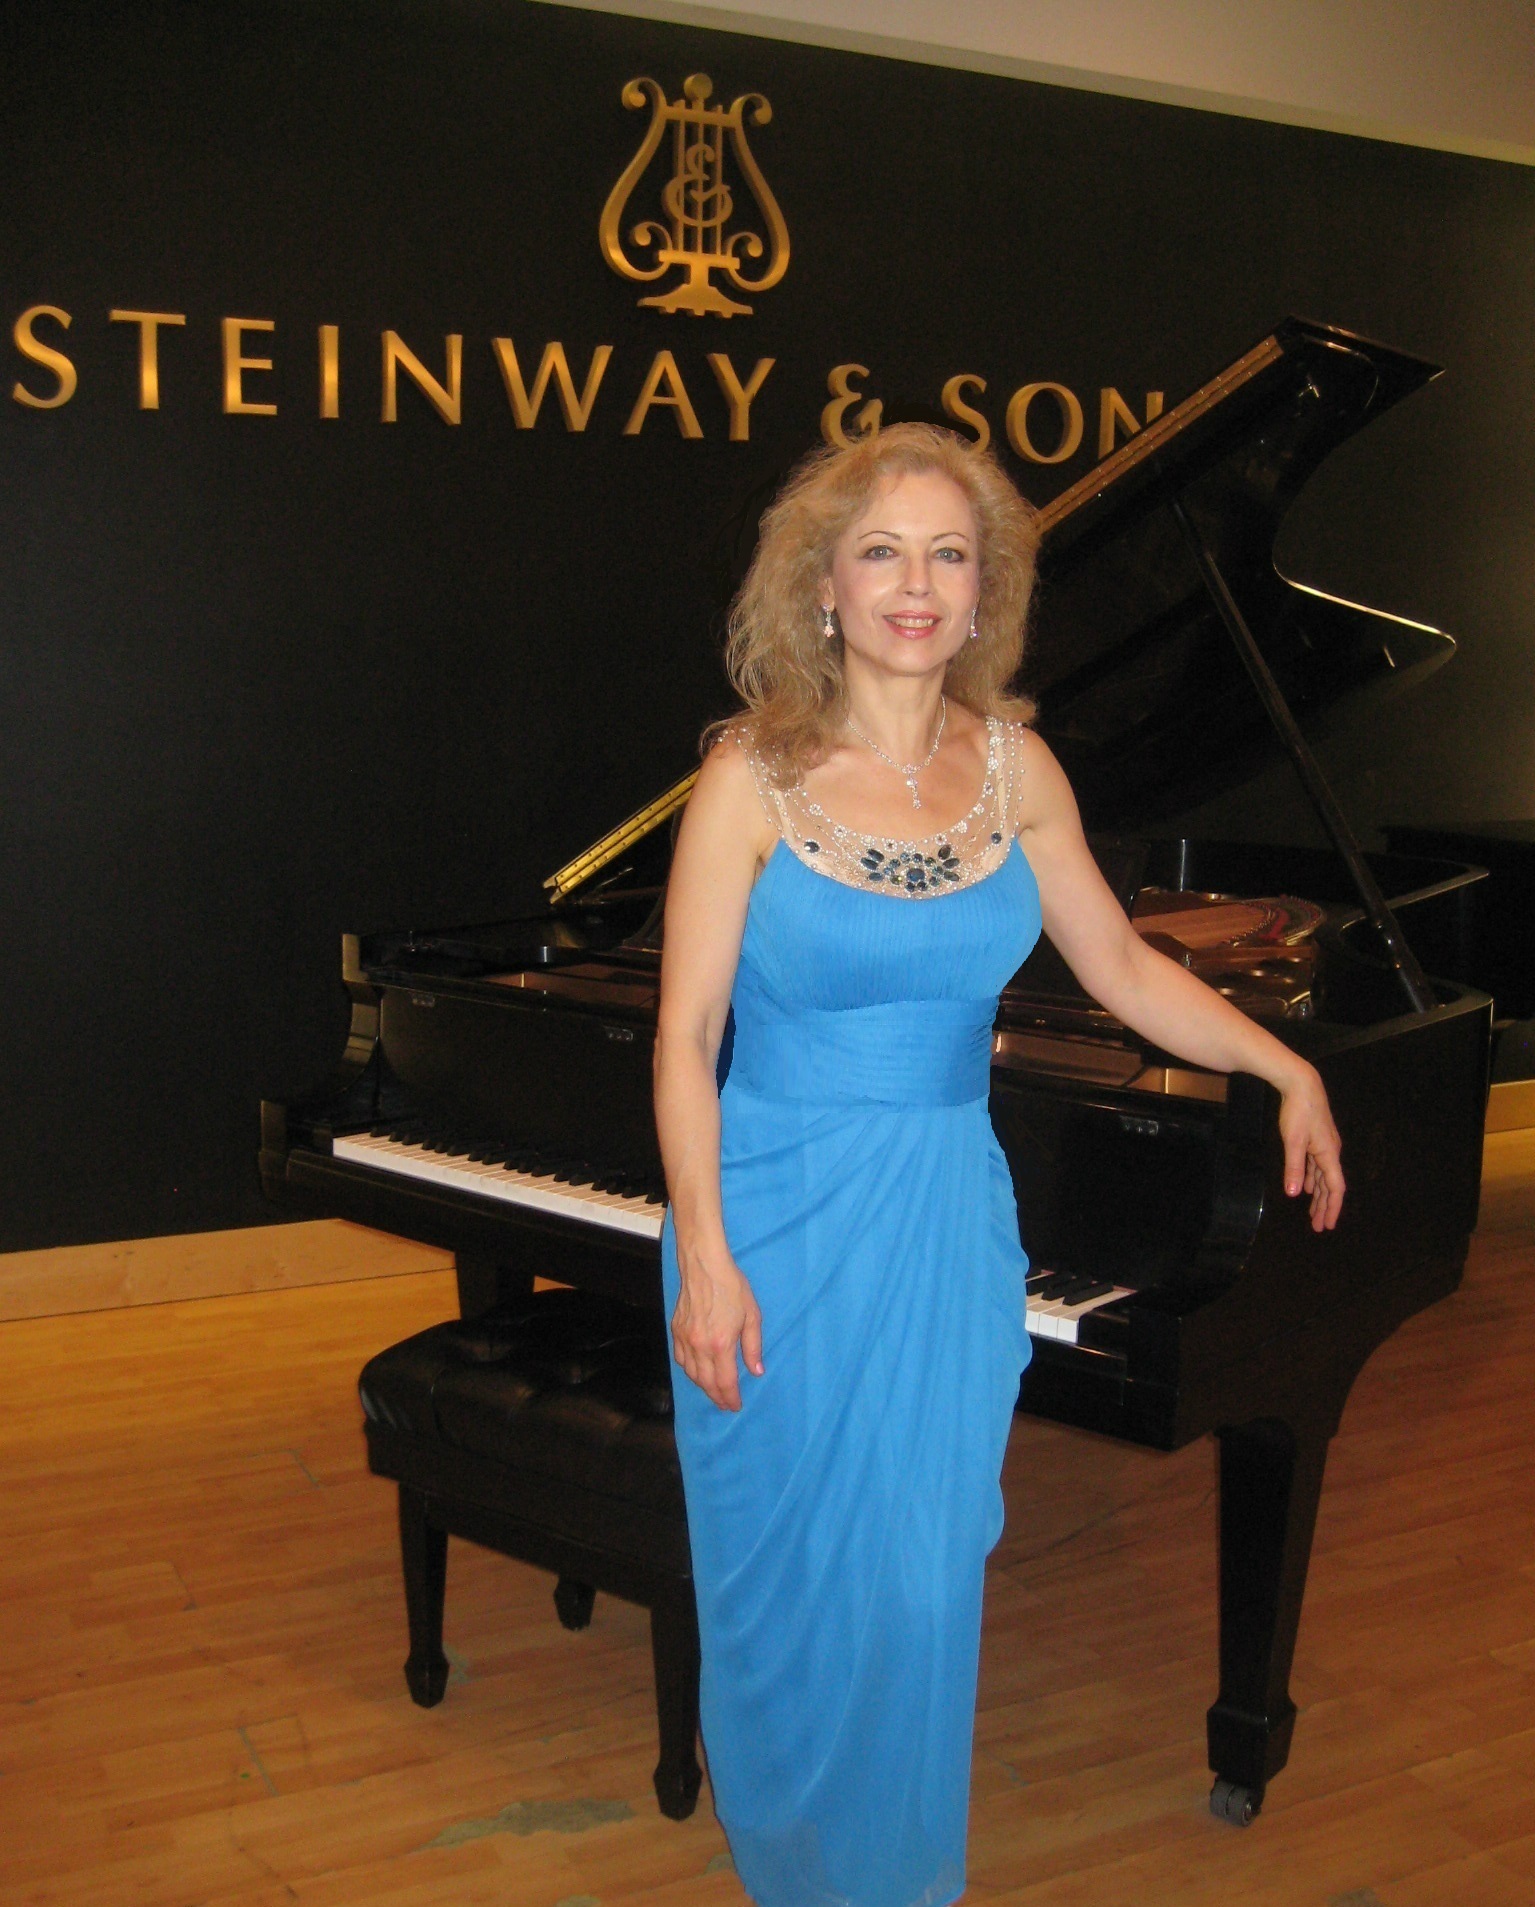 Steinway Gallery, Coral Gables, Fl - 2012